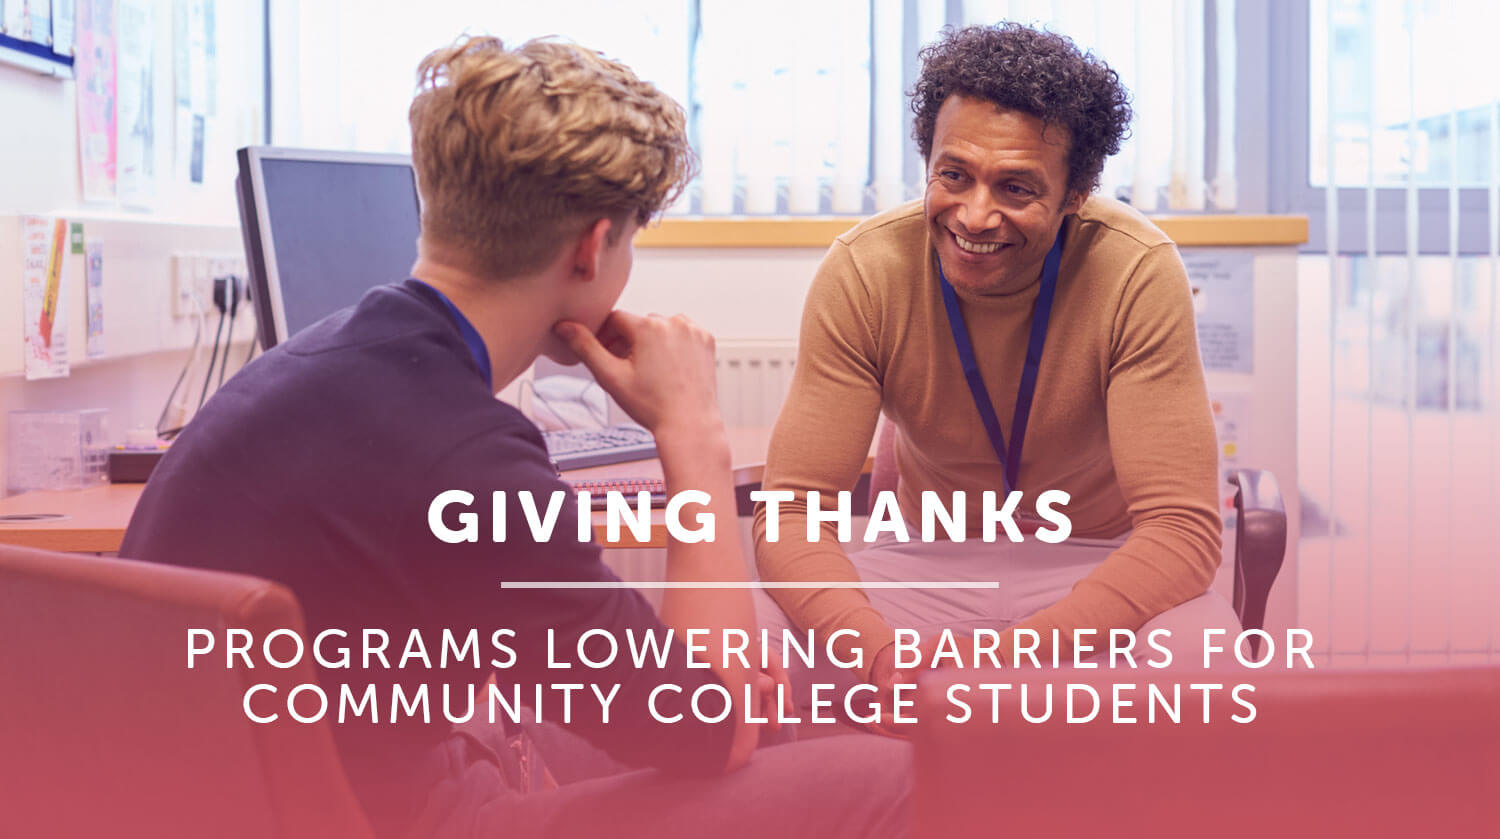 Giving Thanks: Programs Lowering Barriers for Community College Students